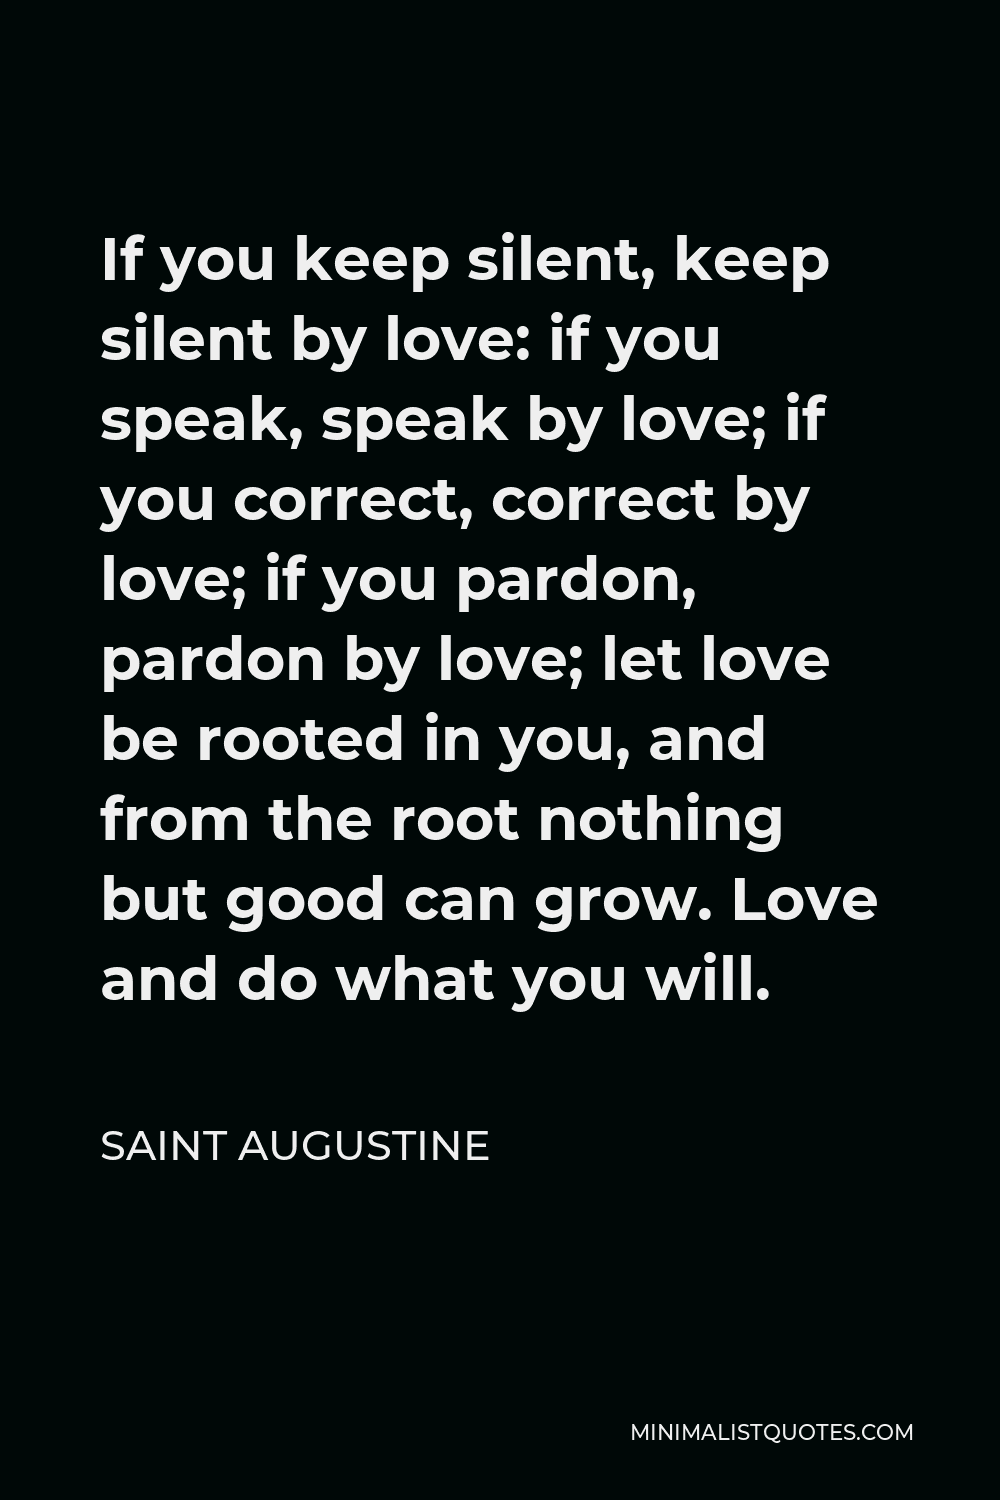 Saint Augustine Quote - If you keep silent, keep silent by love: if you speak, speak by love; if you correct, correct by love; if you pardon, pardon by love; let love be rooted in you, and from the root nothing but good can grow. Love and do what you will.